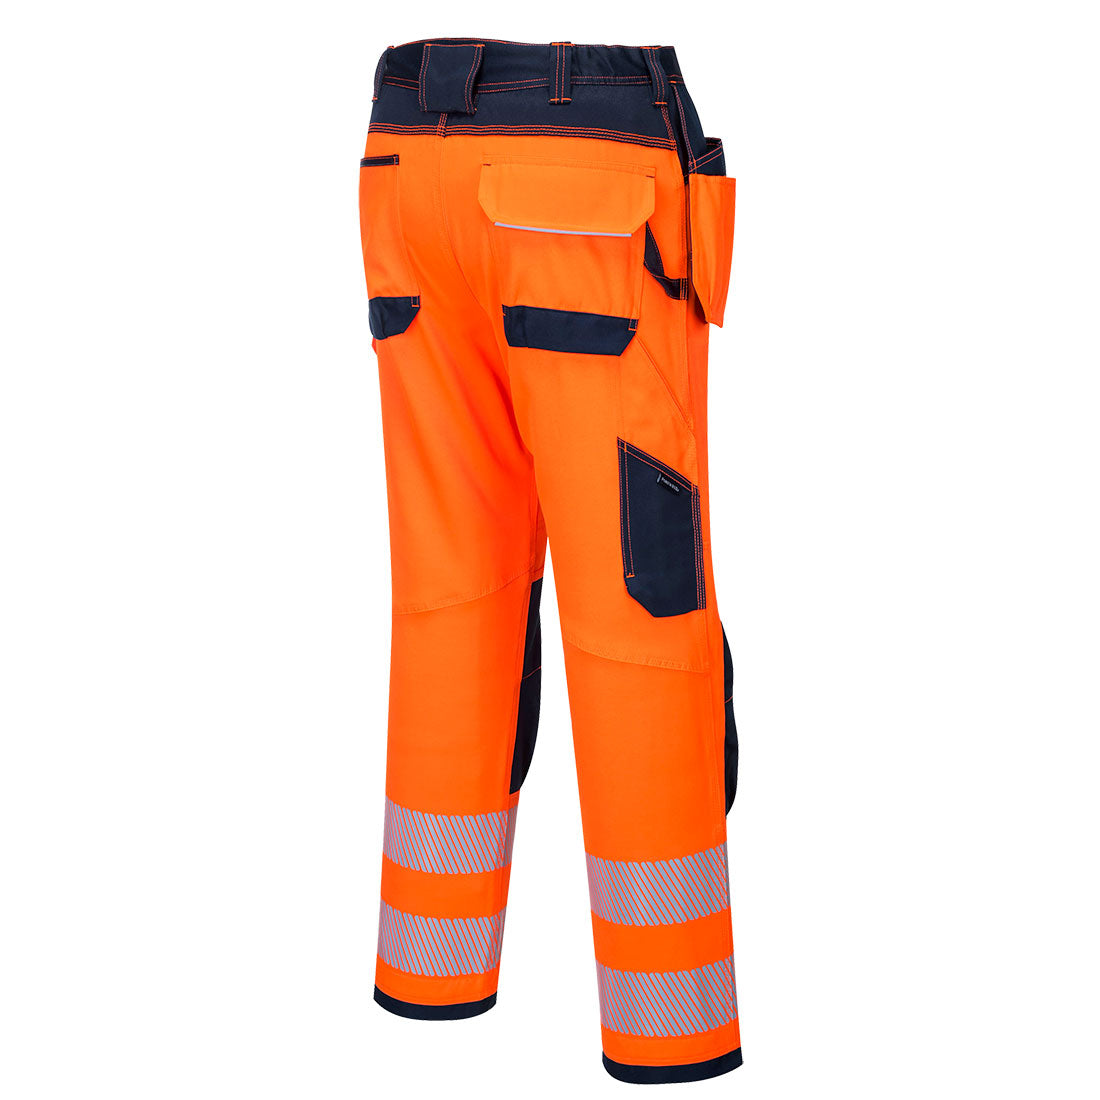 Portwest T501 PW3 Hi Vis Holster Work Trousers 1#colour_orange-navy 2#colour_orange-navy 3#colour_orange-navy